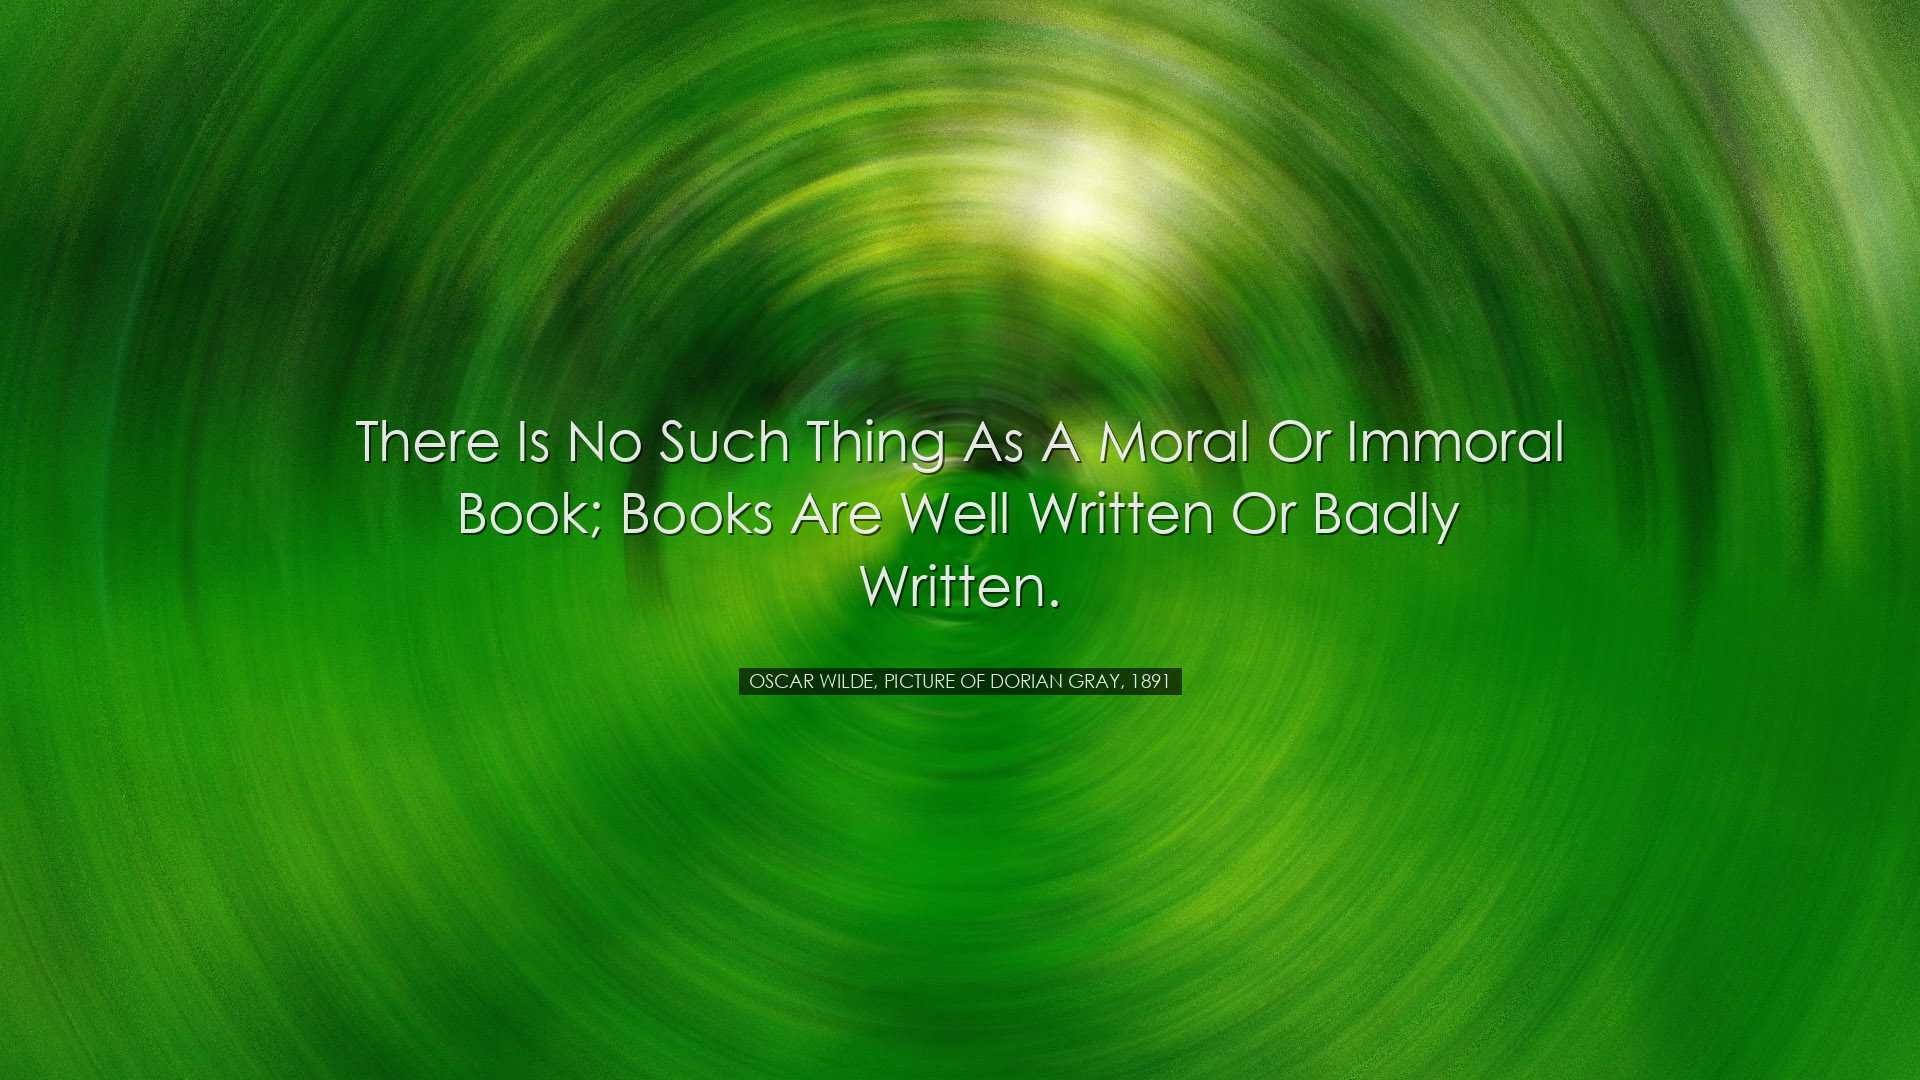 There is no such thing as a moral or immoral book; books are well